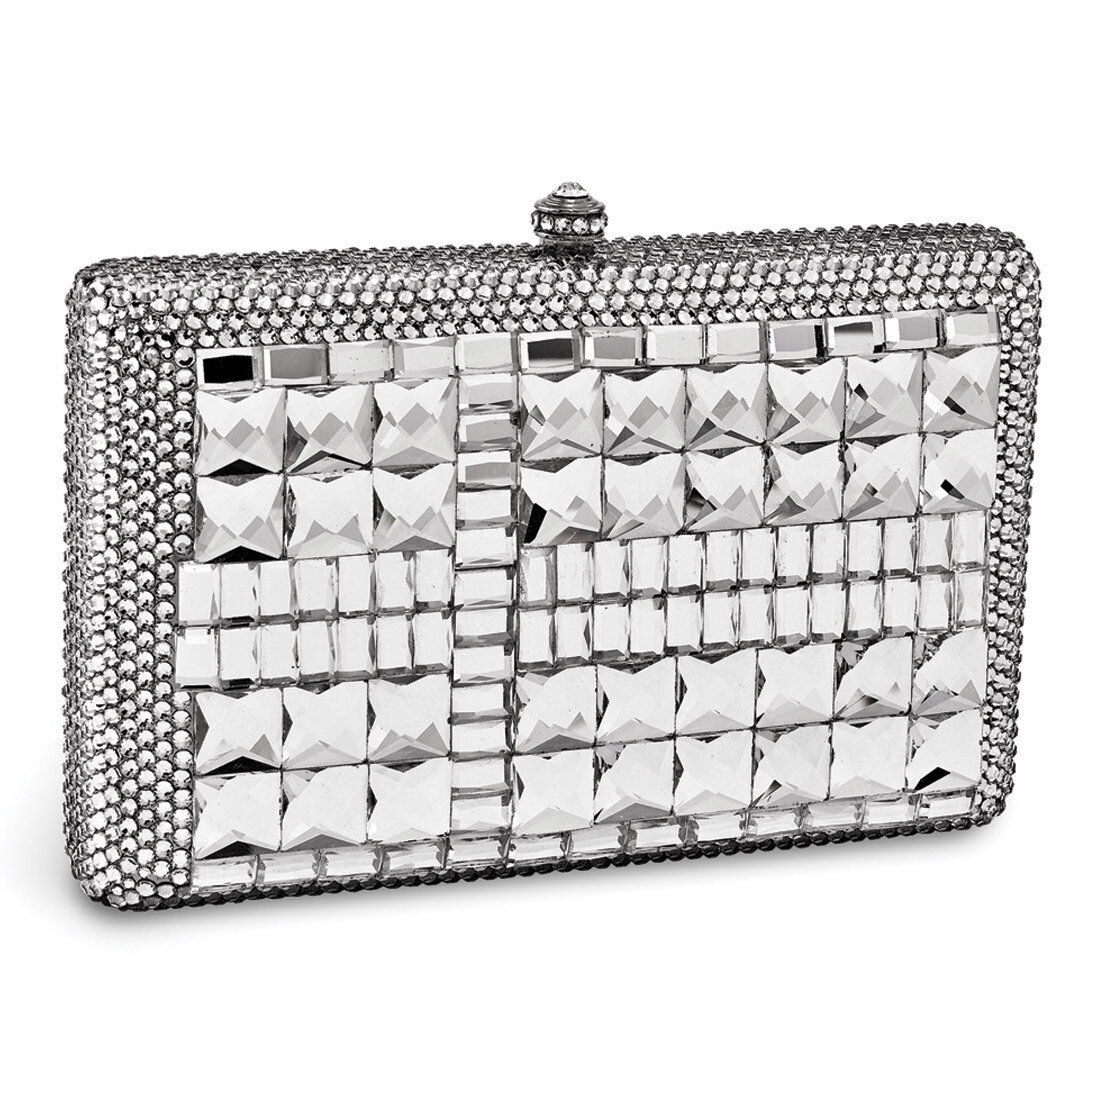 Black Crystal Evening Bag with Chain GM16960